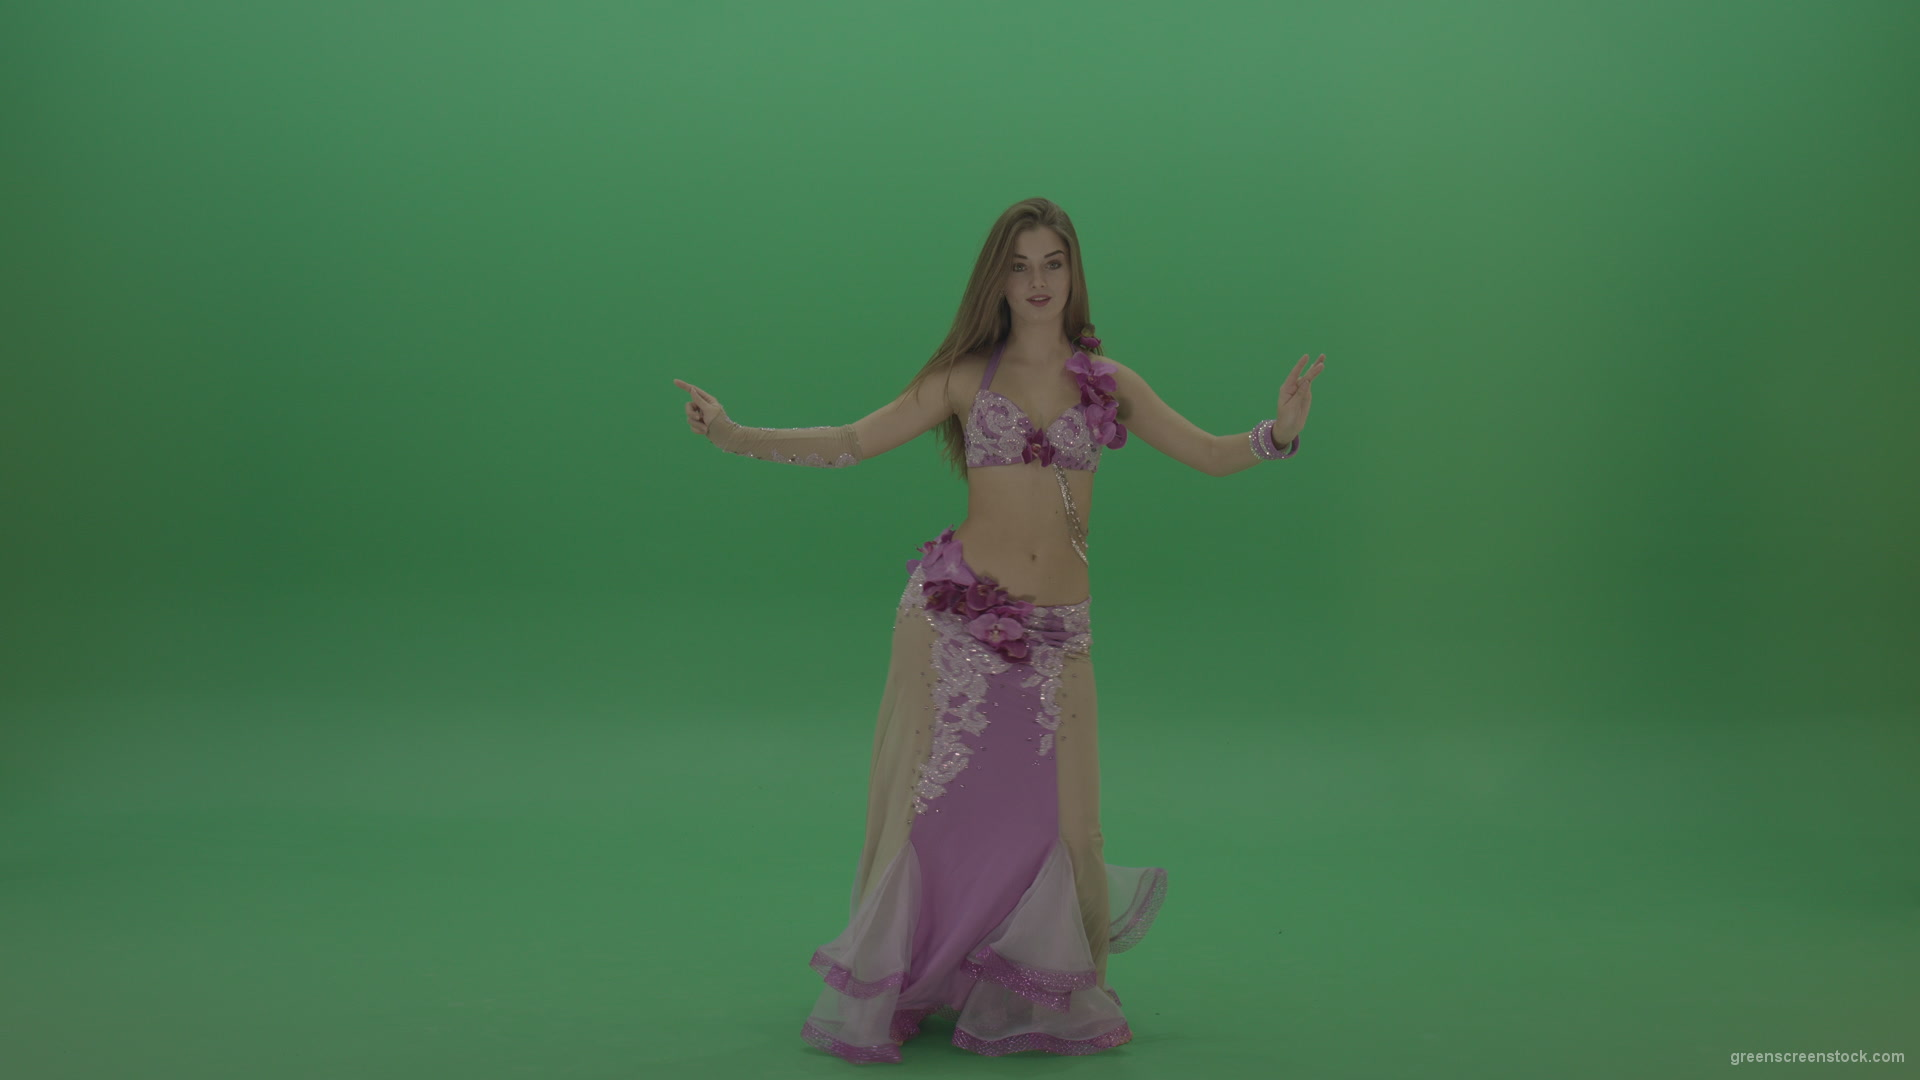 Delightful-belly-dancer-in-pink-wear-display-amazing-dance-moves-over-chromakey-background_002 Green Screen Stock